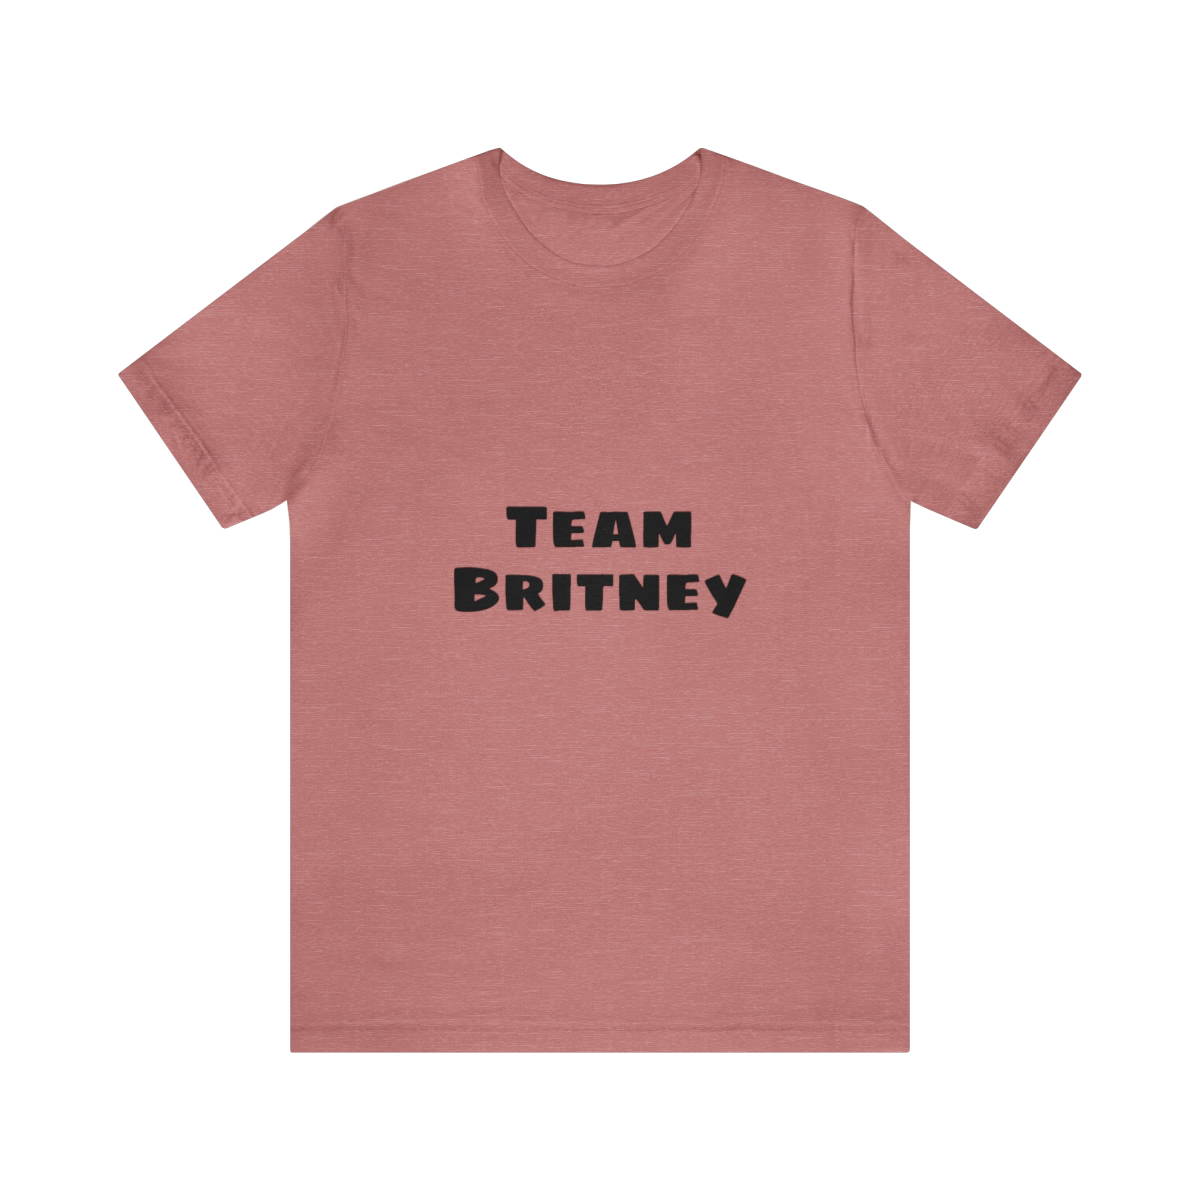 Get them while they last! Who's side are you on? #teambritney #teamjustin #thewomaninme #BritneySpears  #JustinTimberlake